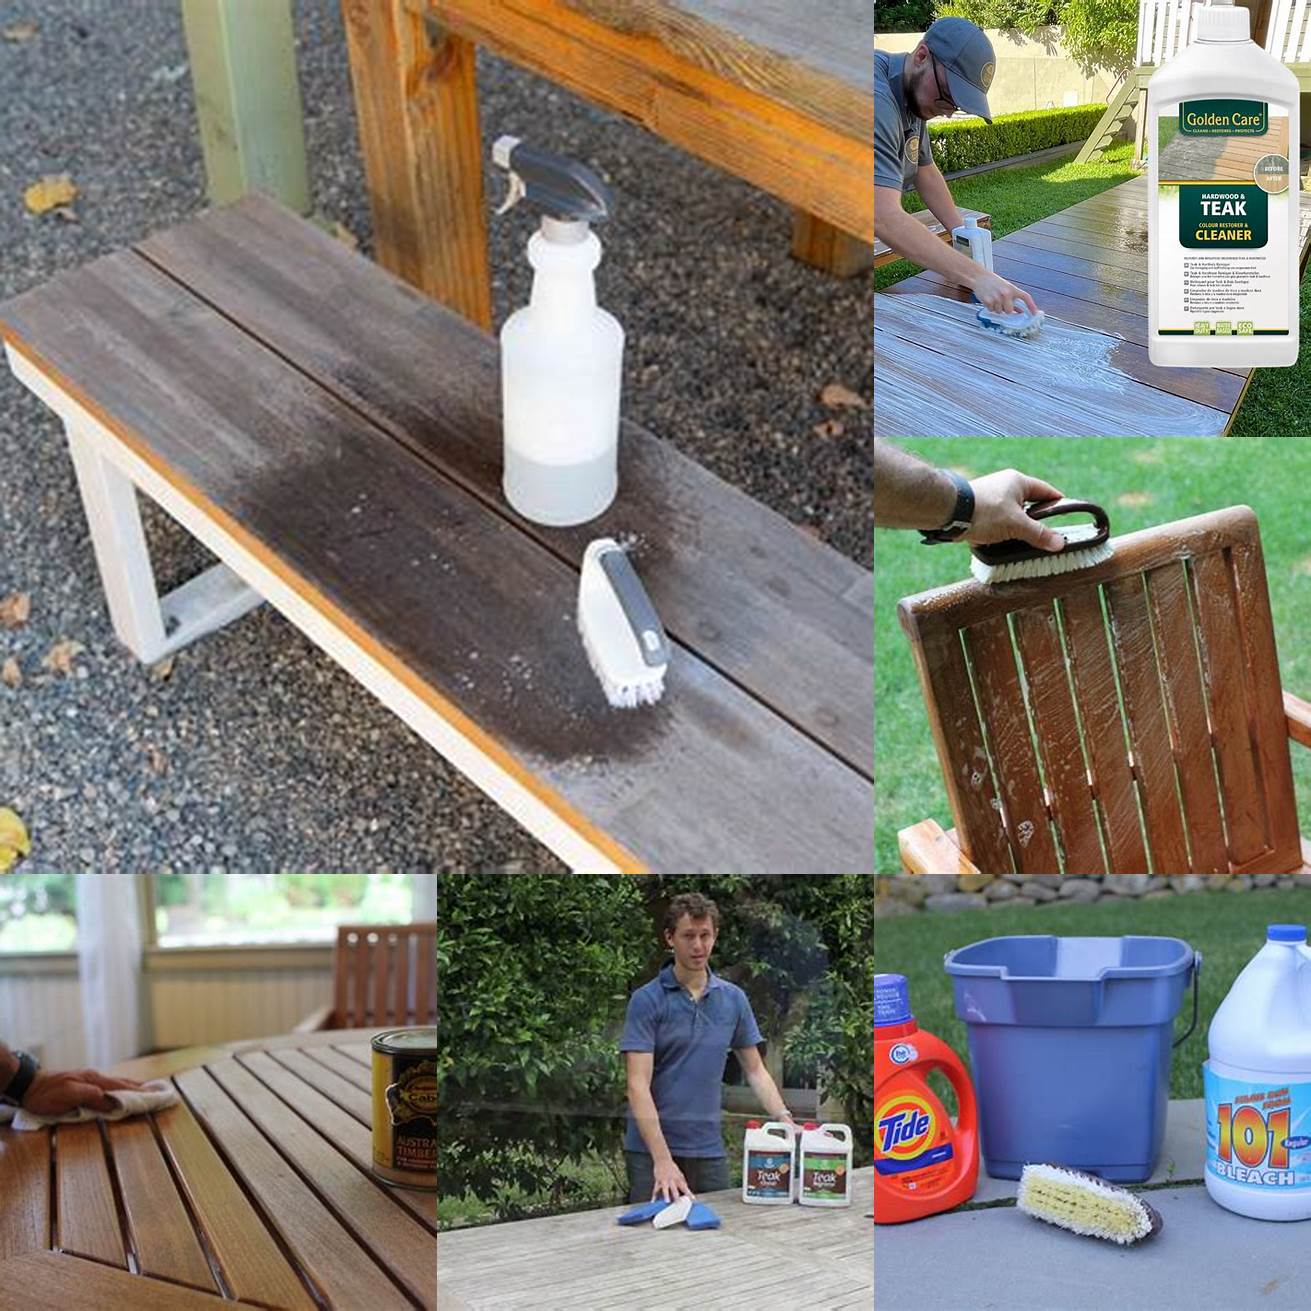 Teak Cleaning Solution